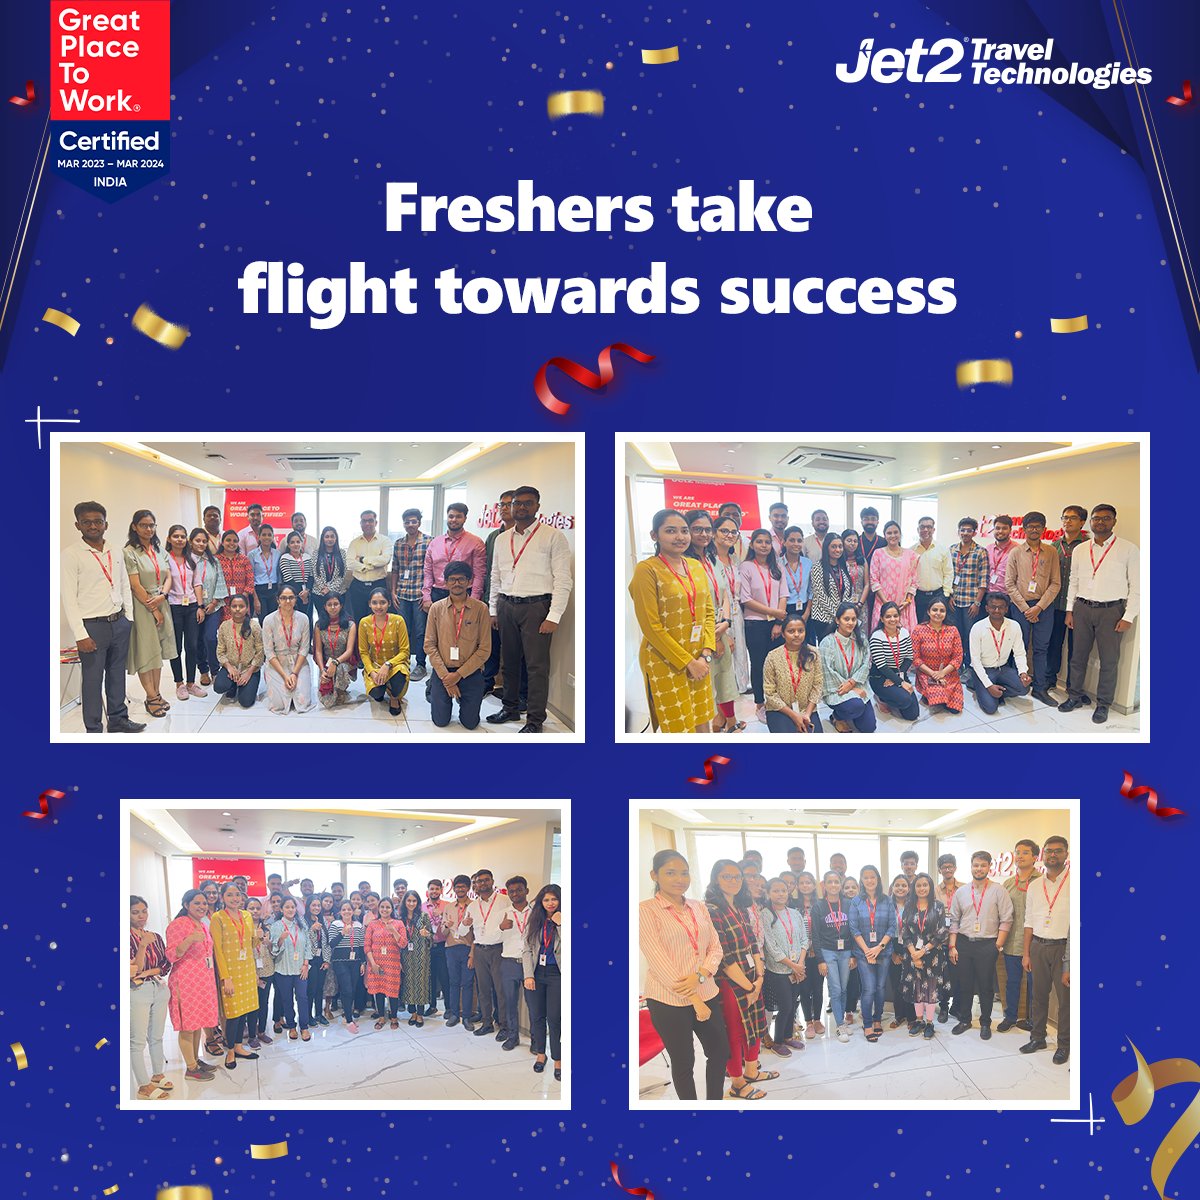 Celebrating the bright and ambitious minds that have joined our Jet2TT team! Immerse yourself in the energy and camaraderie of our fresher's onboarding event.

#Jet2TT #Jet2TravelTechnologies #GreatPlaceToWork #GPTWCertified #Onboarding #FresherOnboarding #FresherHiring